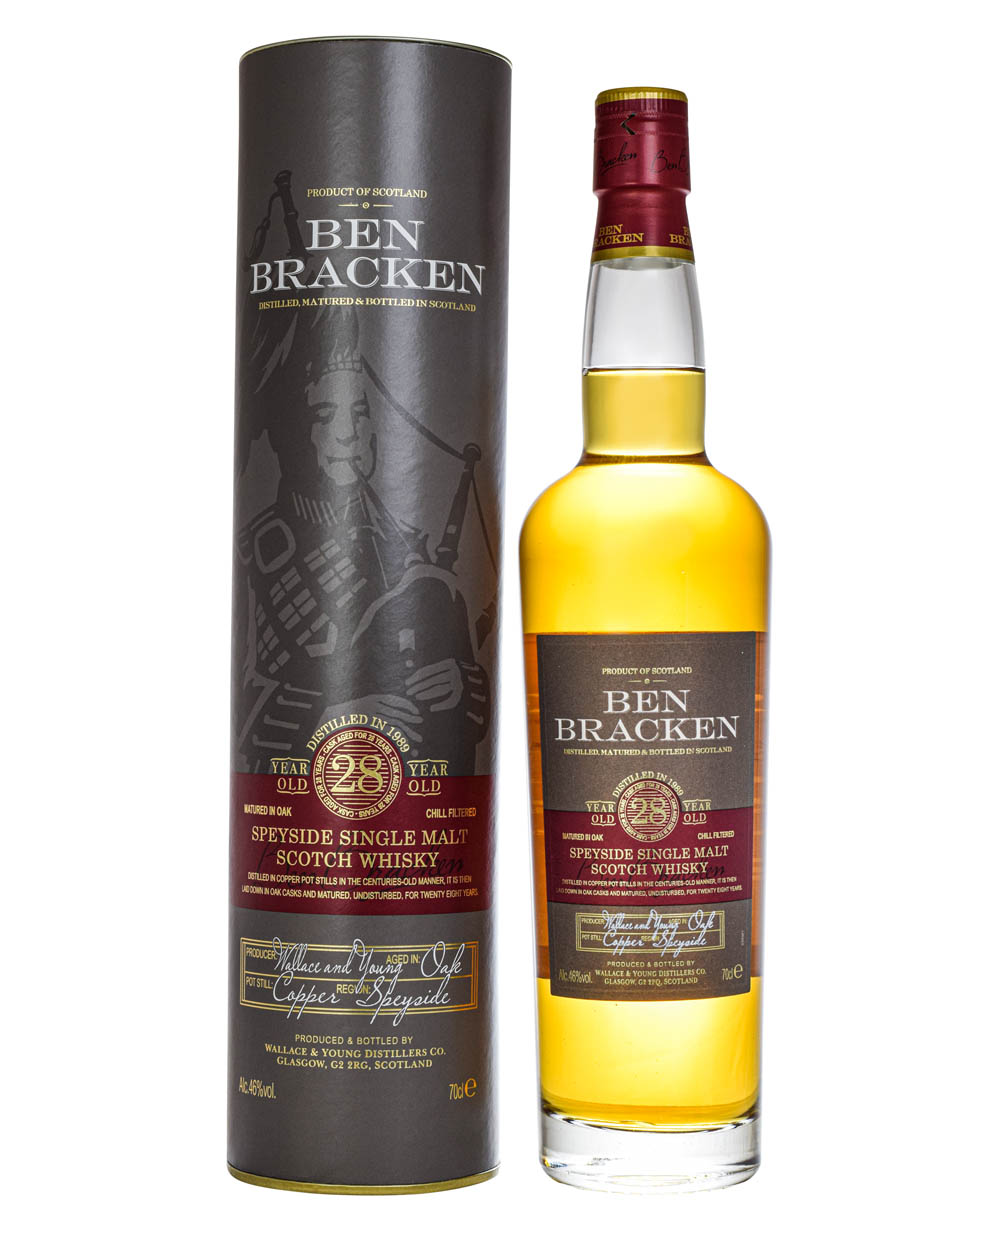 source! Your Bracken - Ben 28 whisky - Musthave Malts Old Years